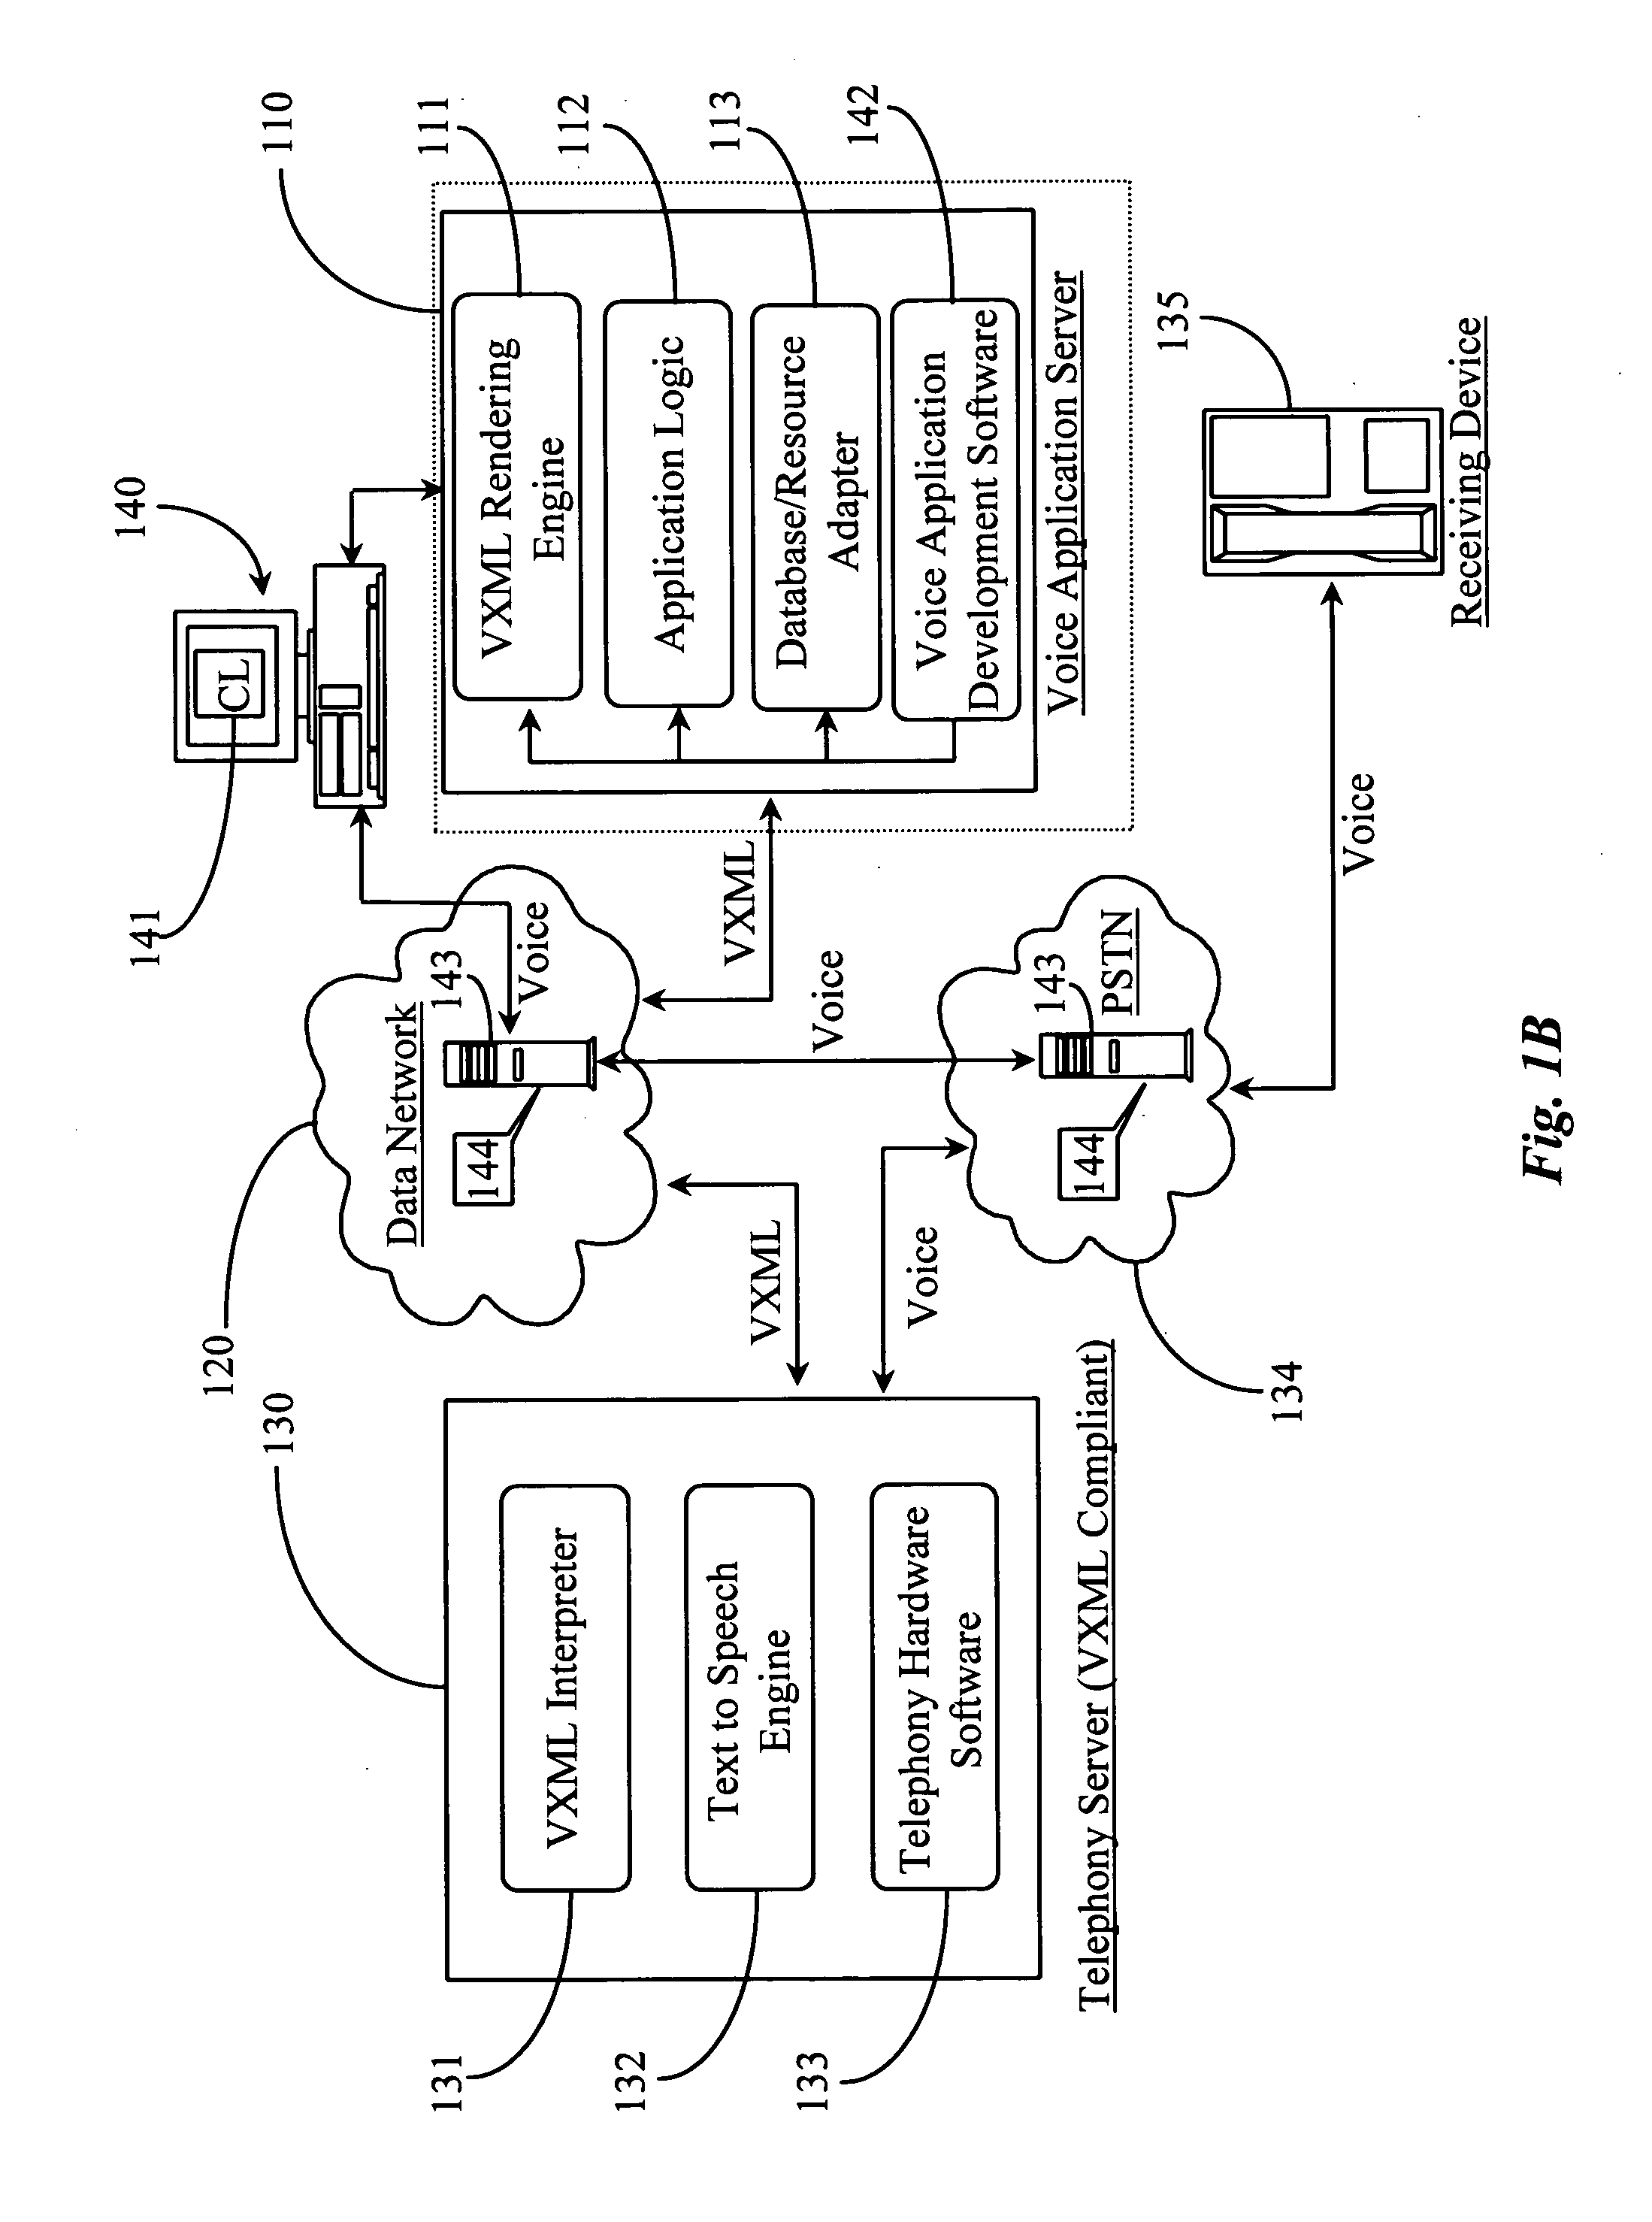 Method and apparatus for adapting a voice extensible markup language-enabled voice system for natural speech recognition and system response